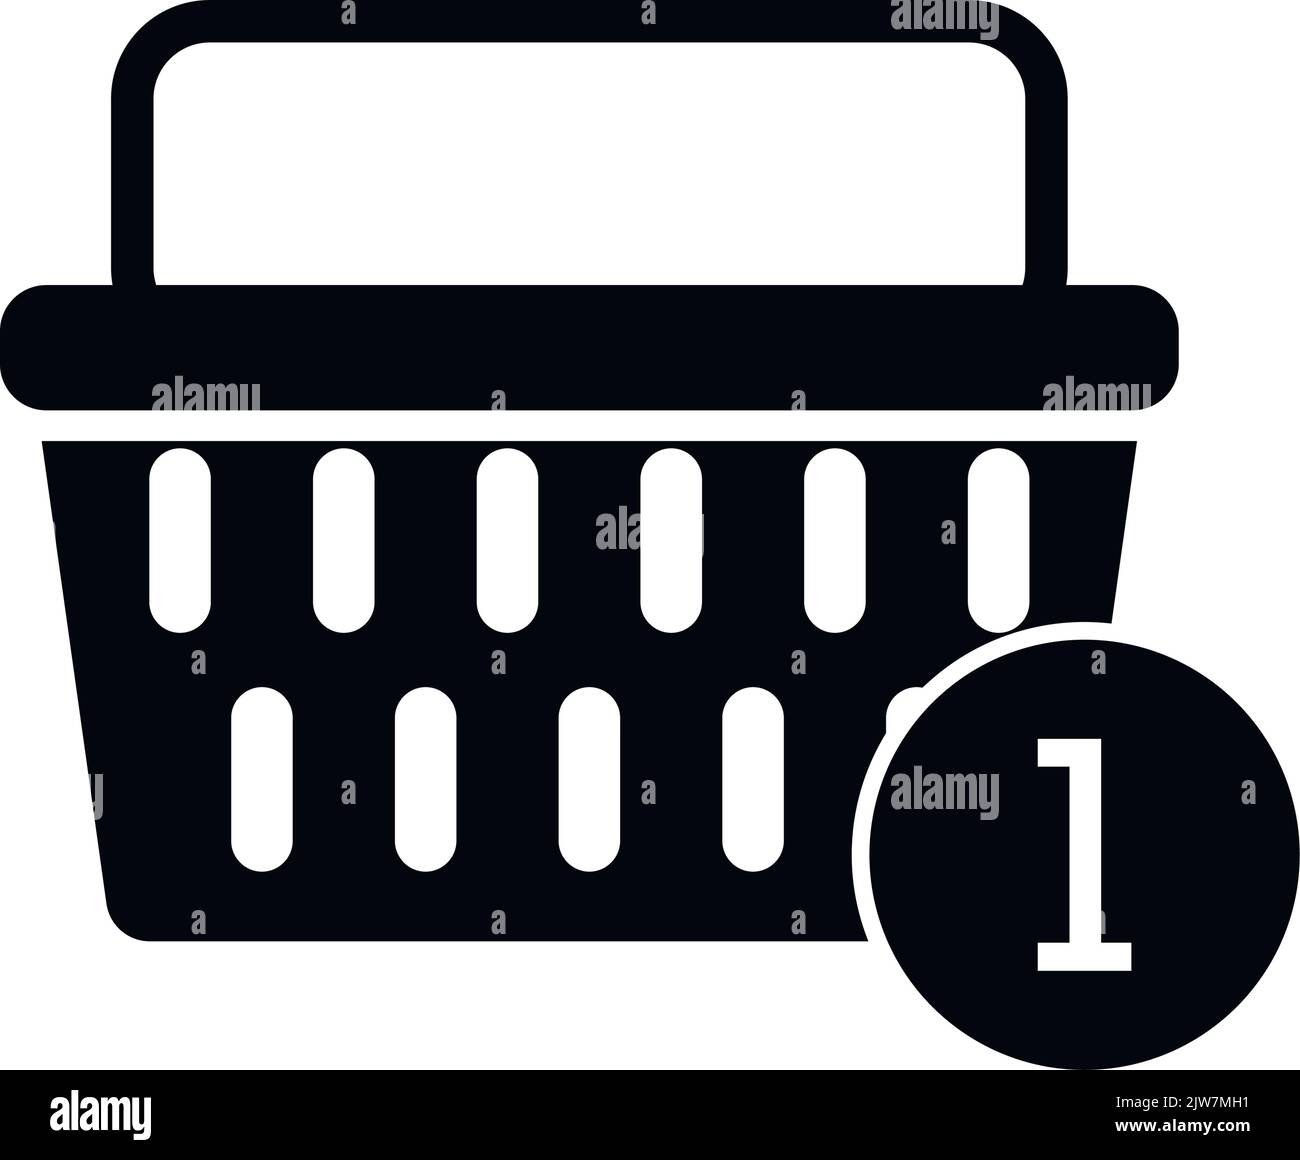 Icon of shopping bag with counter of number items in basket. Vector illustration. Market bag symbol, online shopping, fashion container, web shopper b Stock Vector